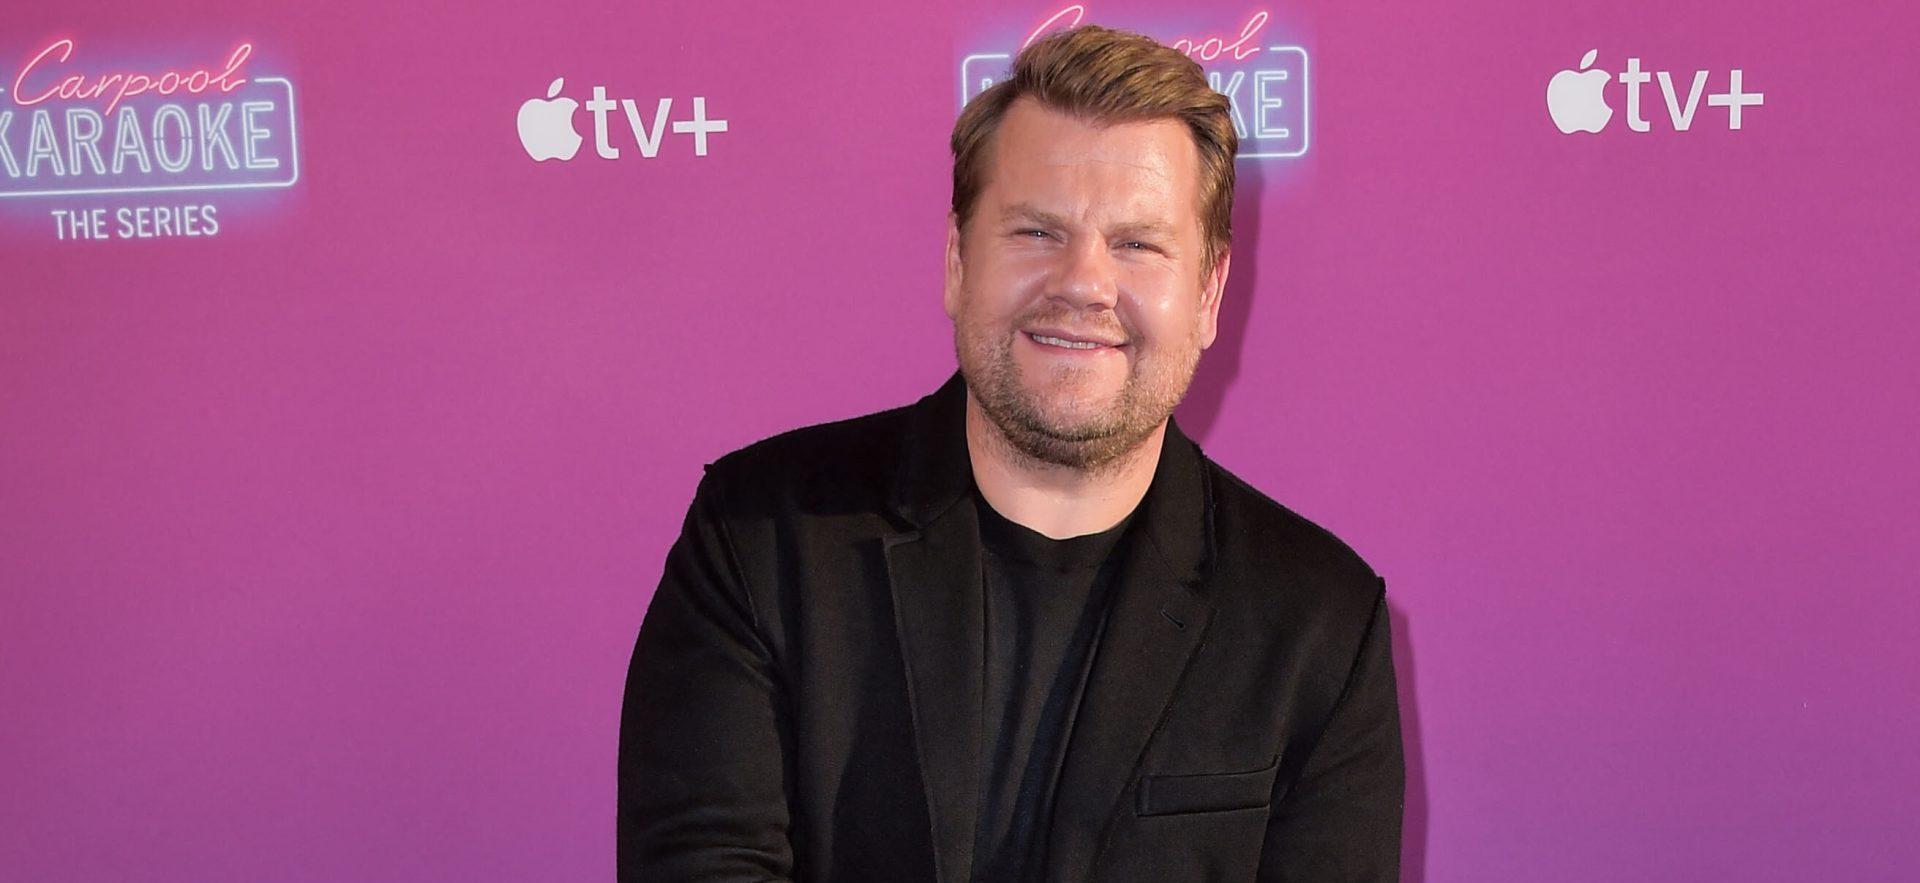 James Corden Promises ‘Huge Pop Star’ As His Final Guest For ‘Late Late Show’